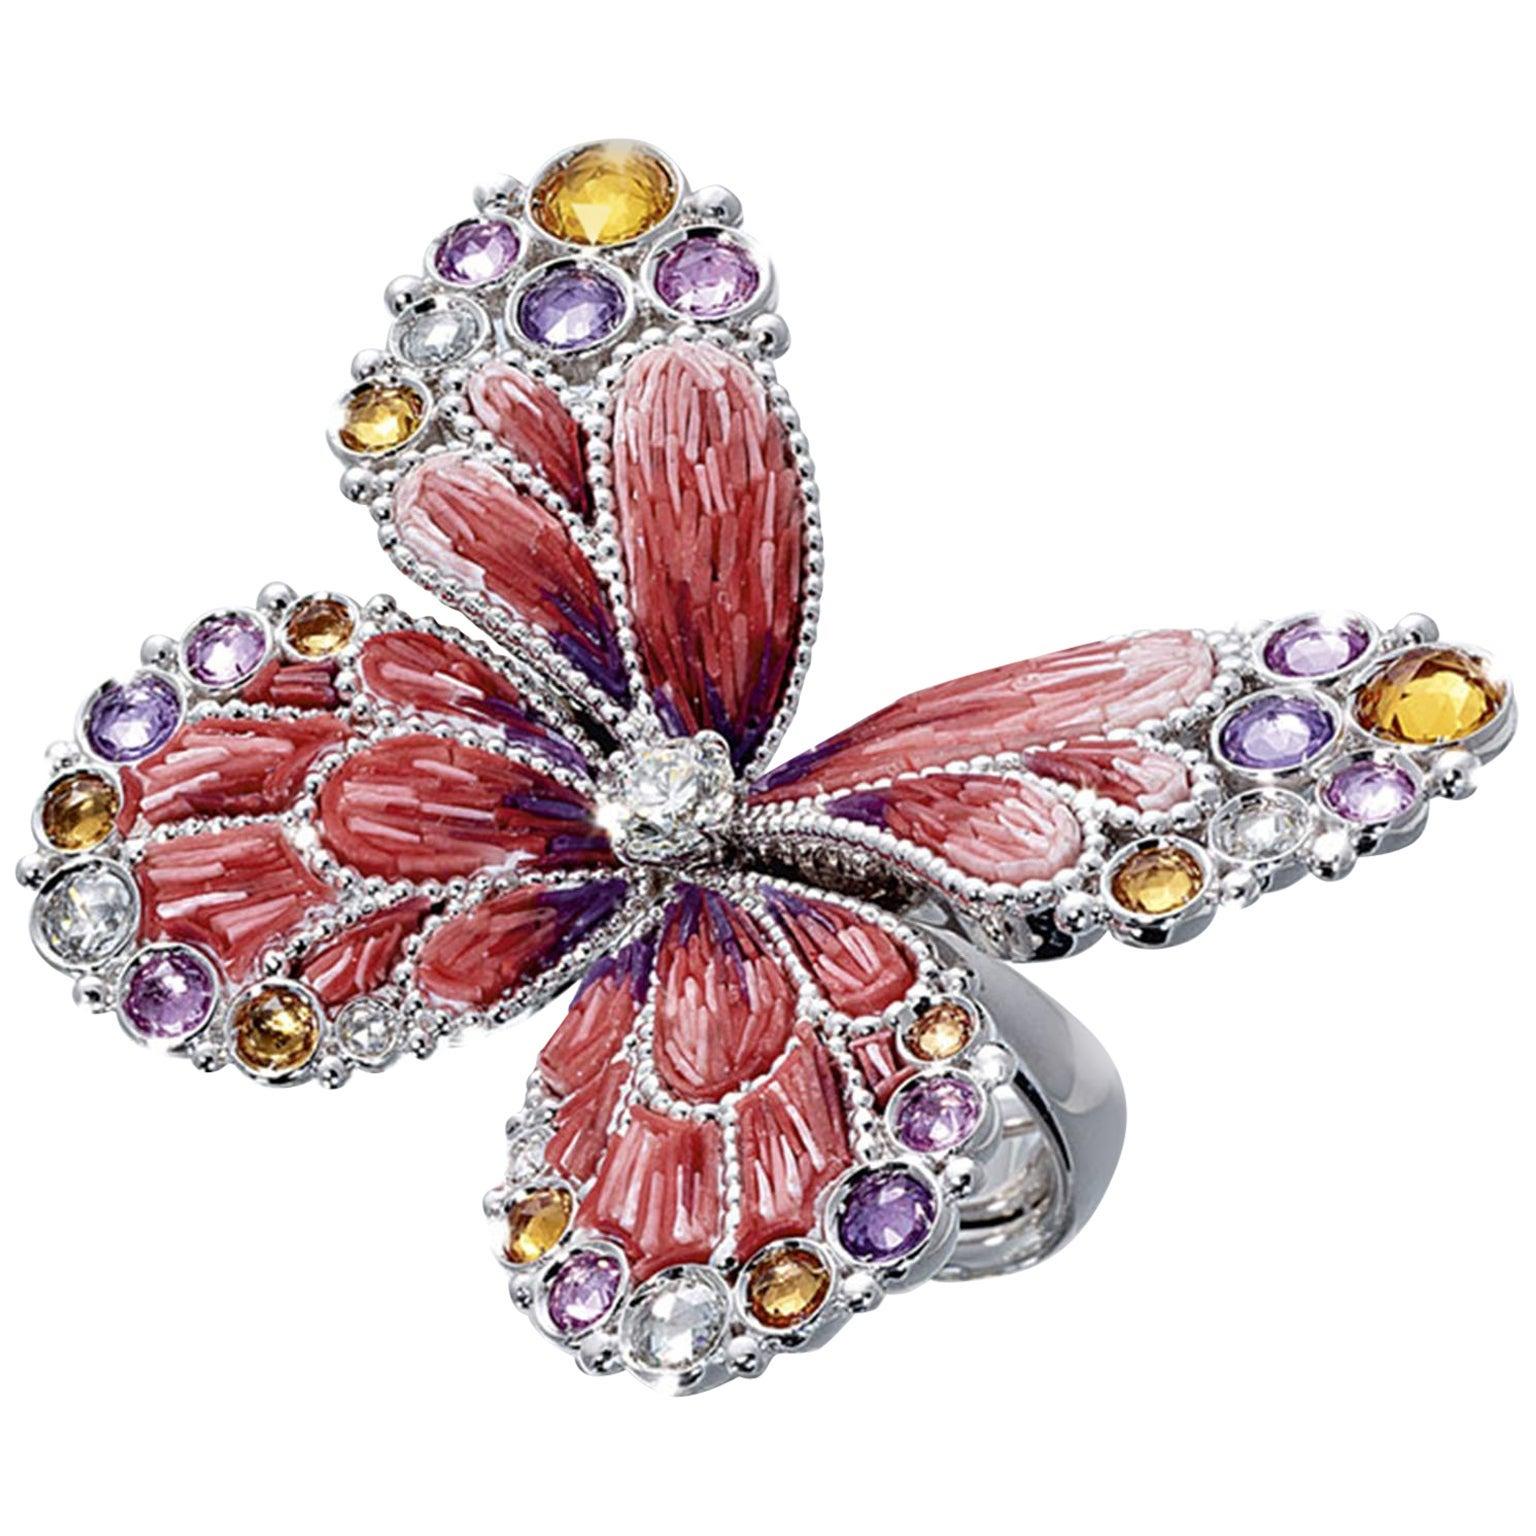 For Sale:  Stylish Cocktail Ring White Diamonds White Gold Multicolor Sapphires Micromosaic